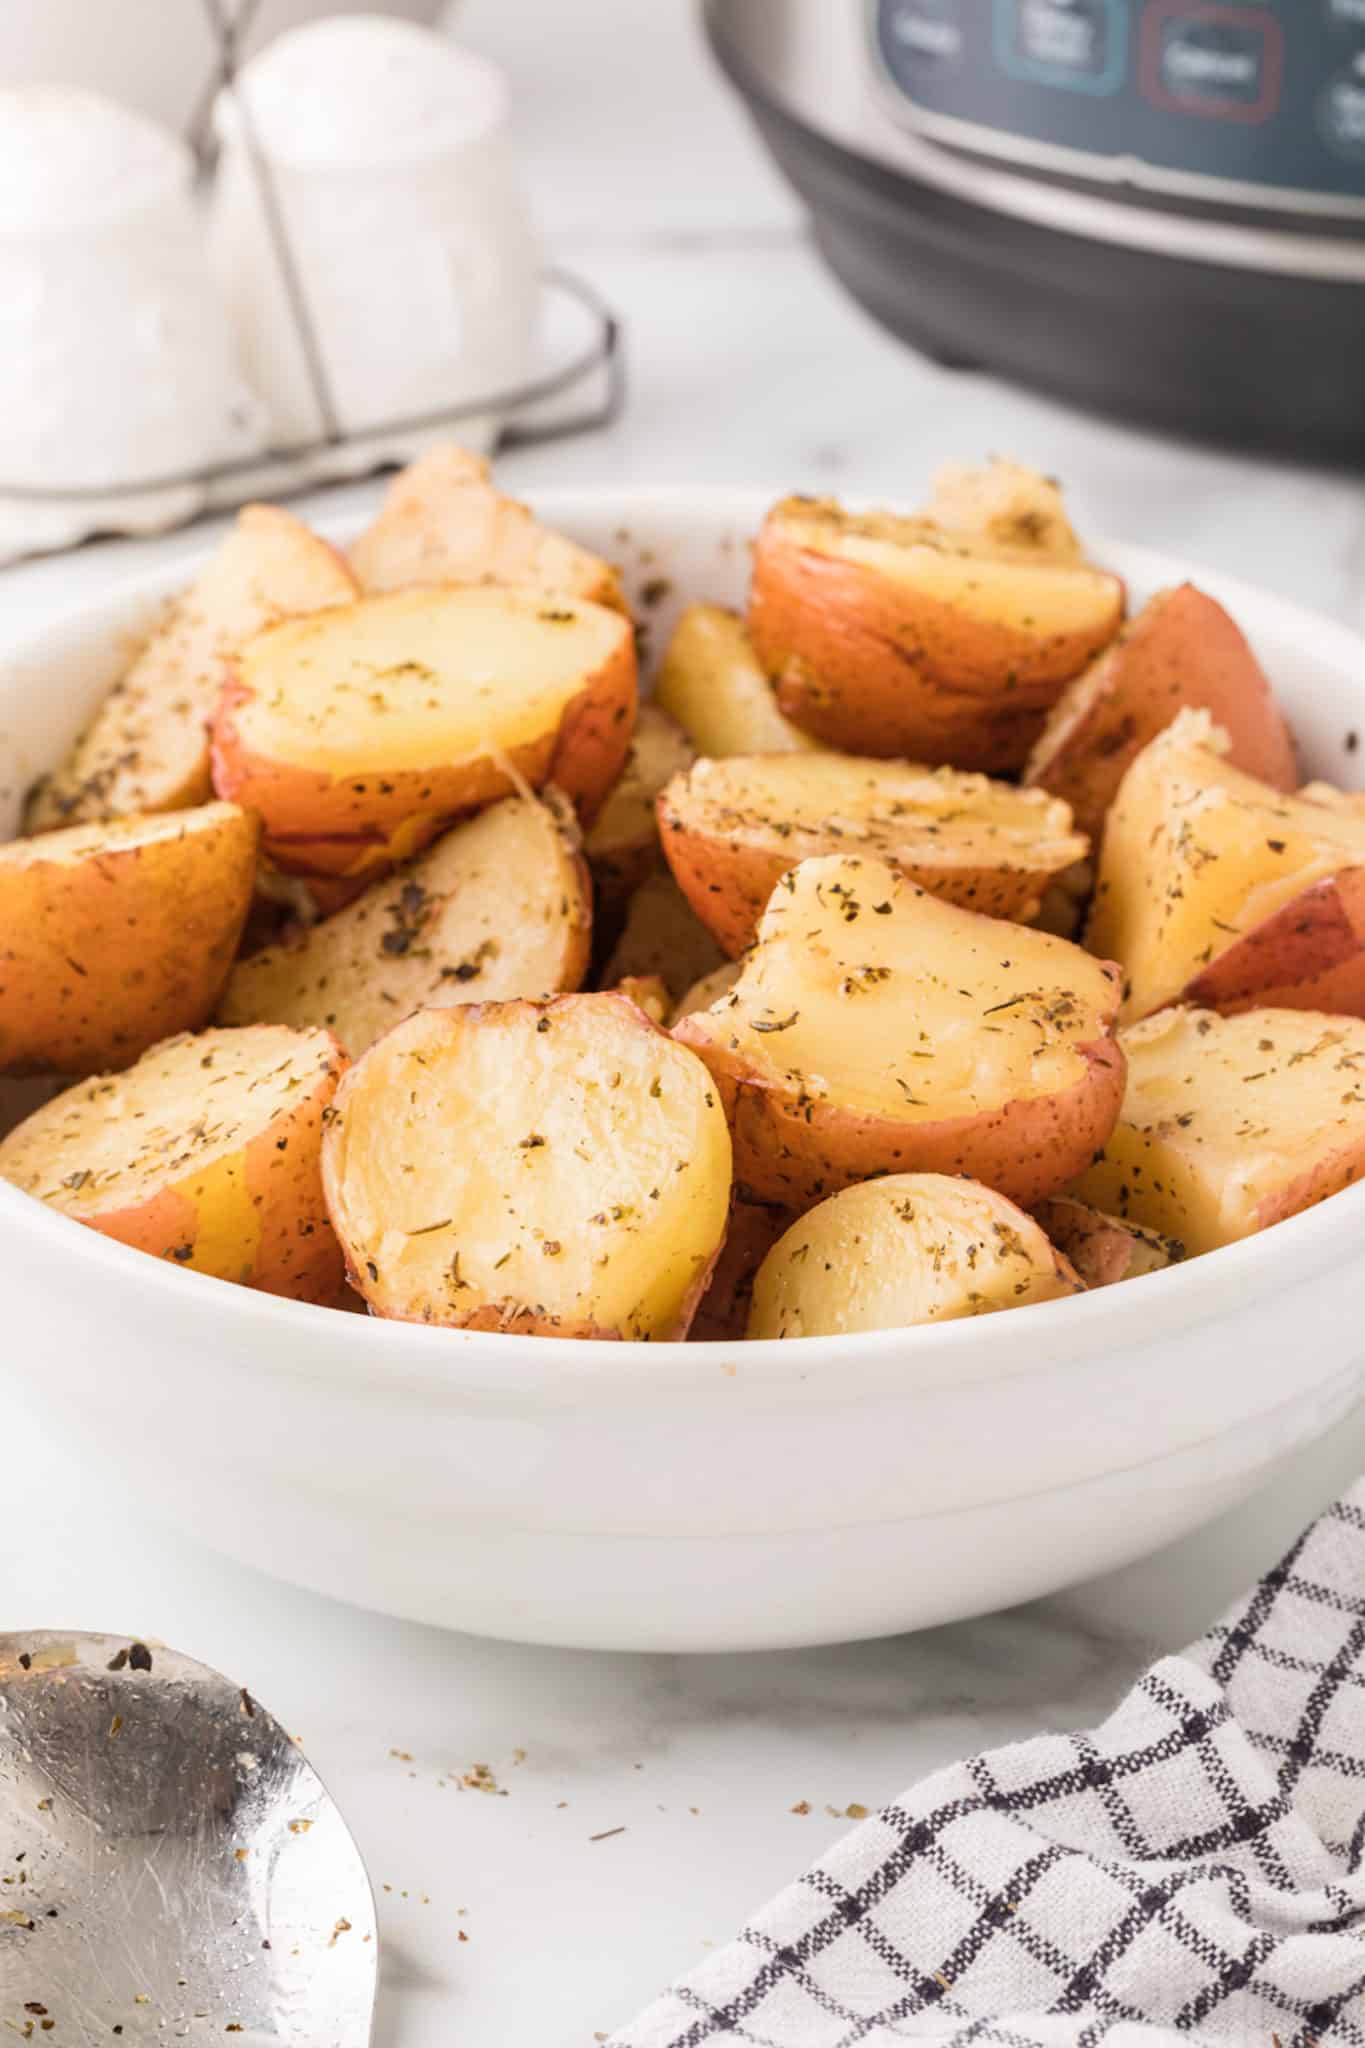 Instant pot red potatoes recipe - ready in 10 minutes